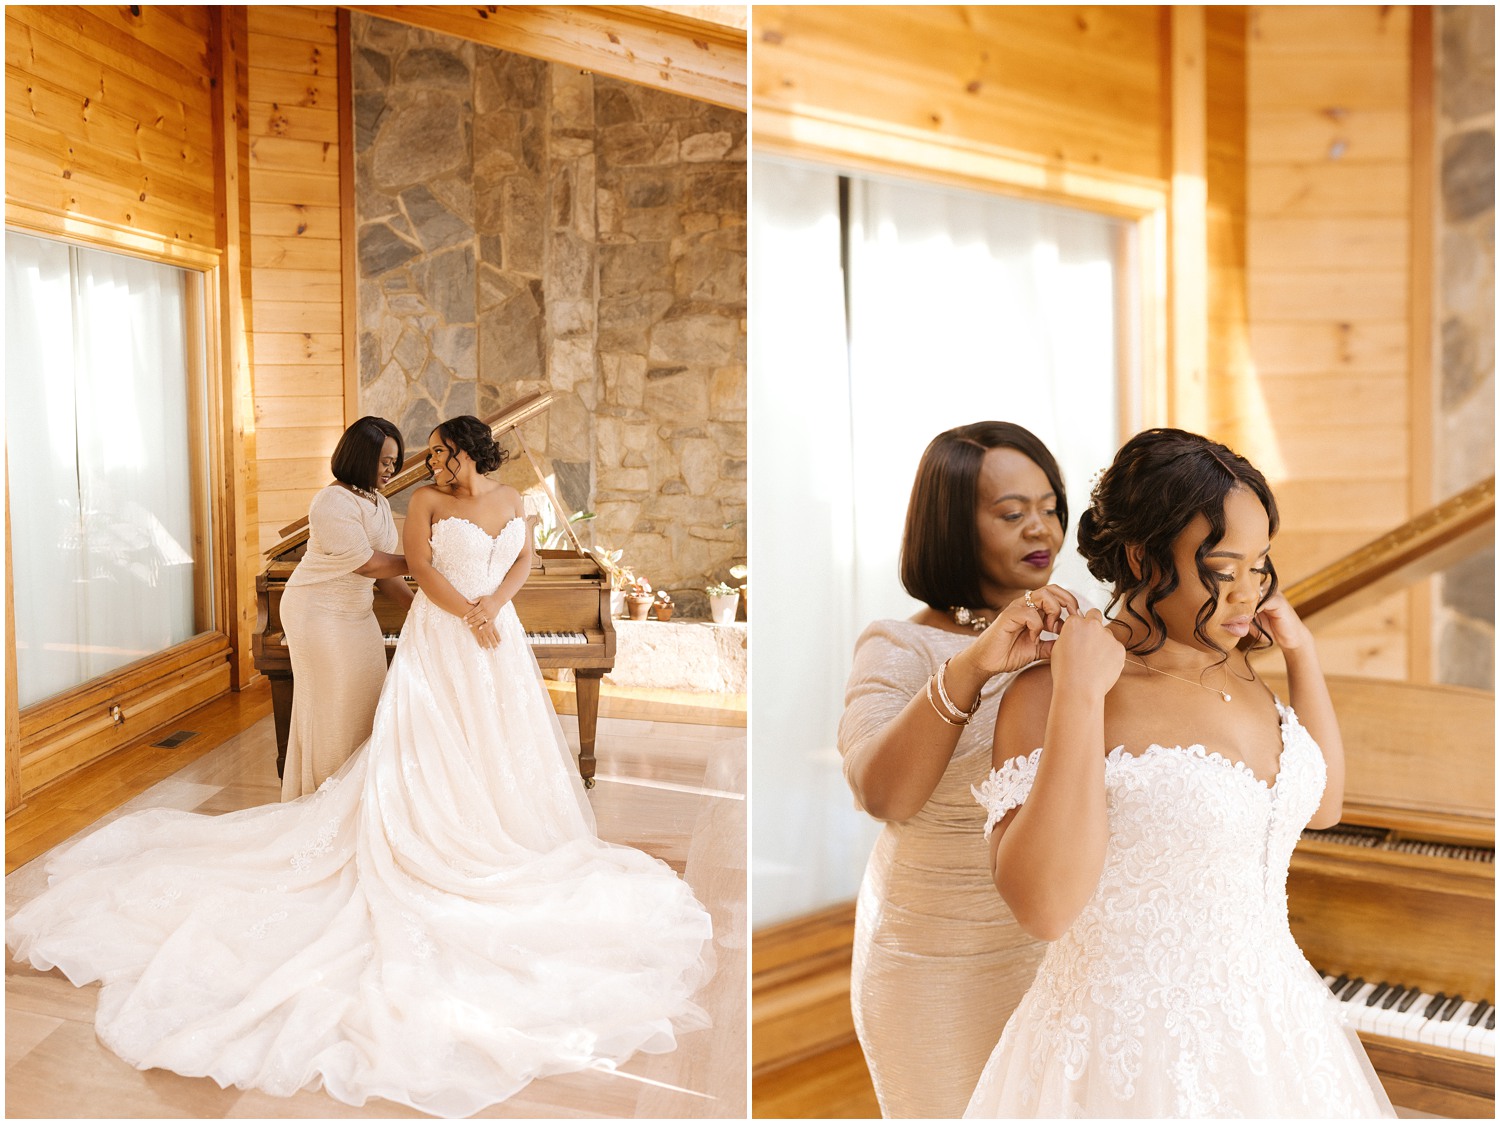 Brides mother helping her into her dress on wedding day